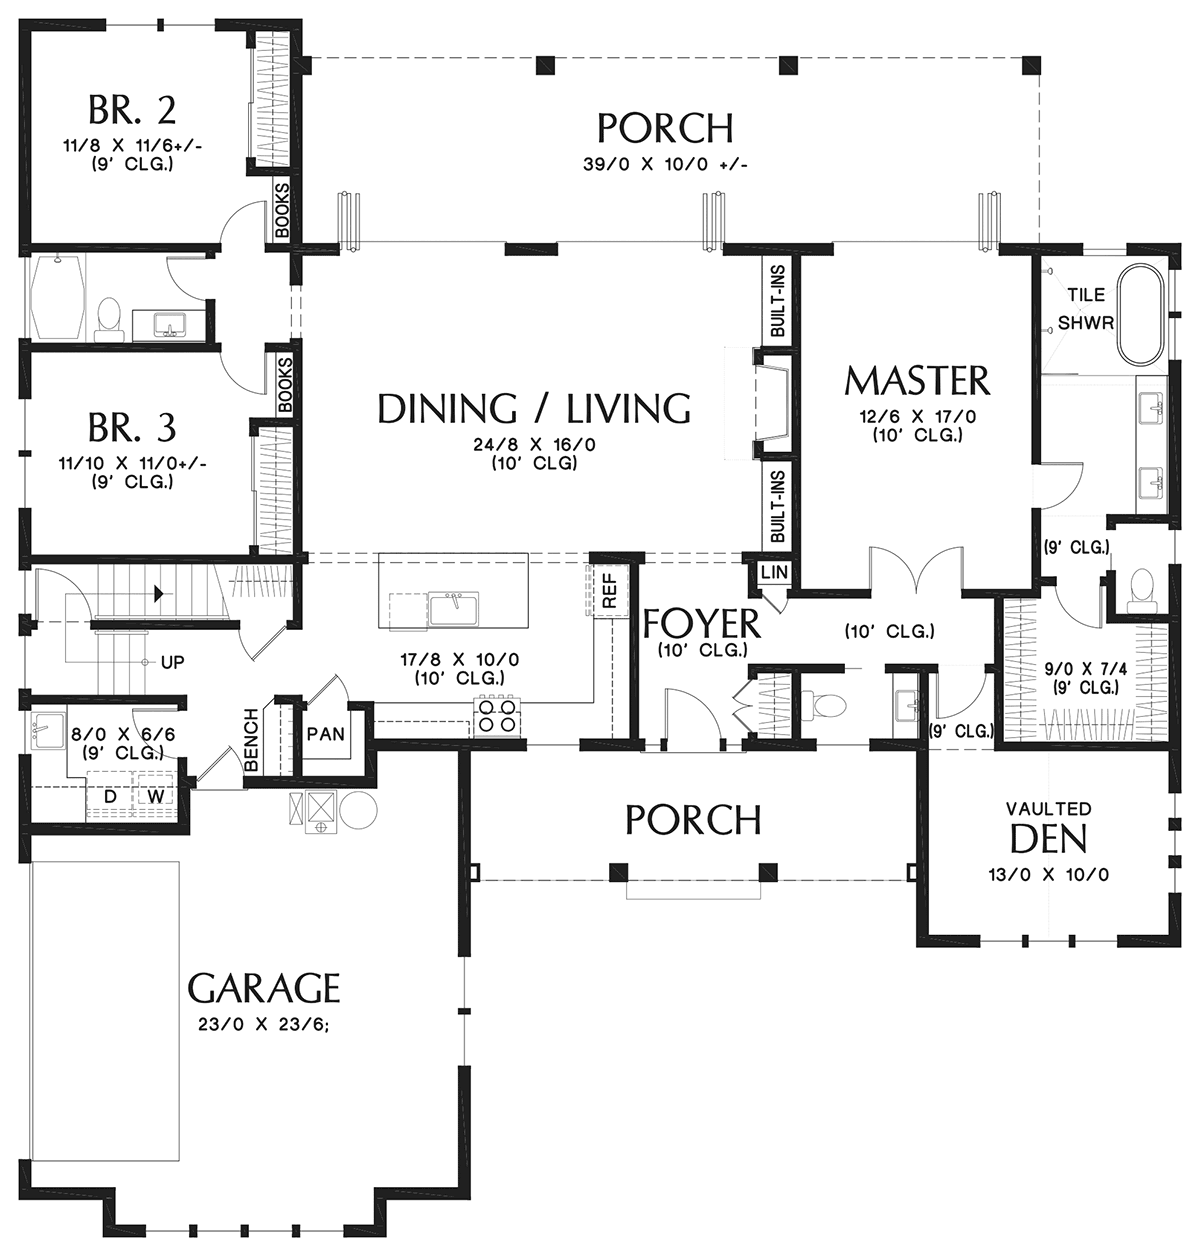 New House Plans- Stay Up To Date With New House Floor Plans